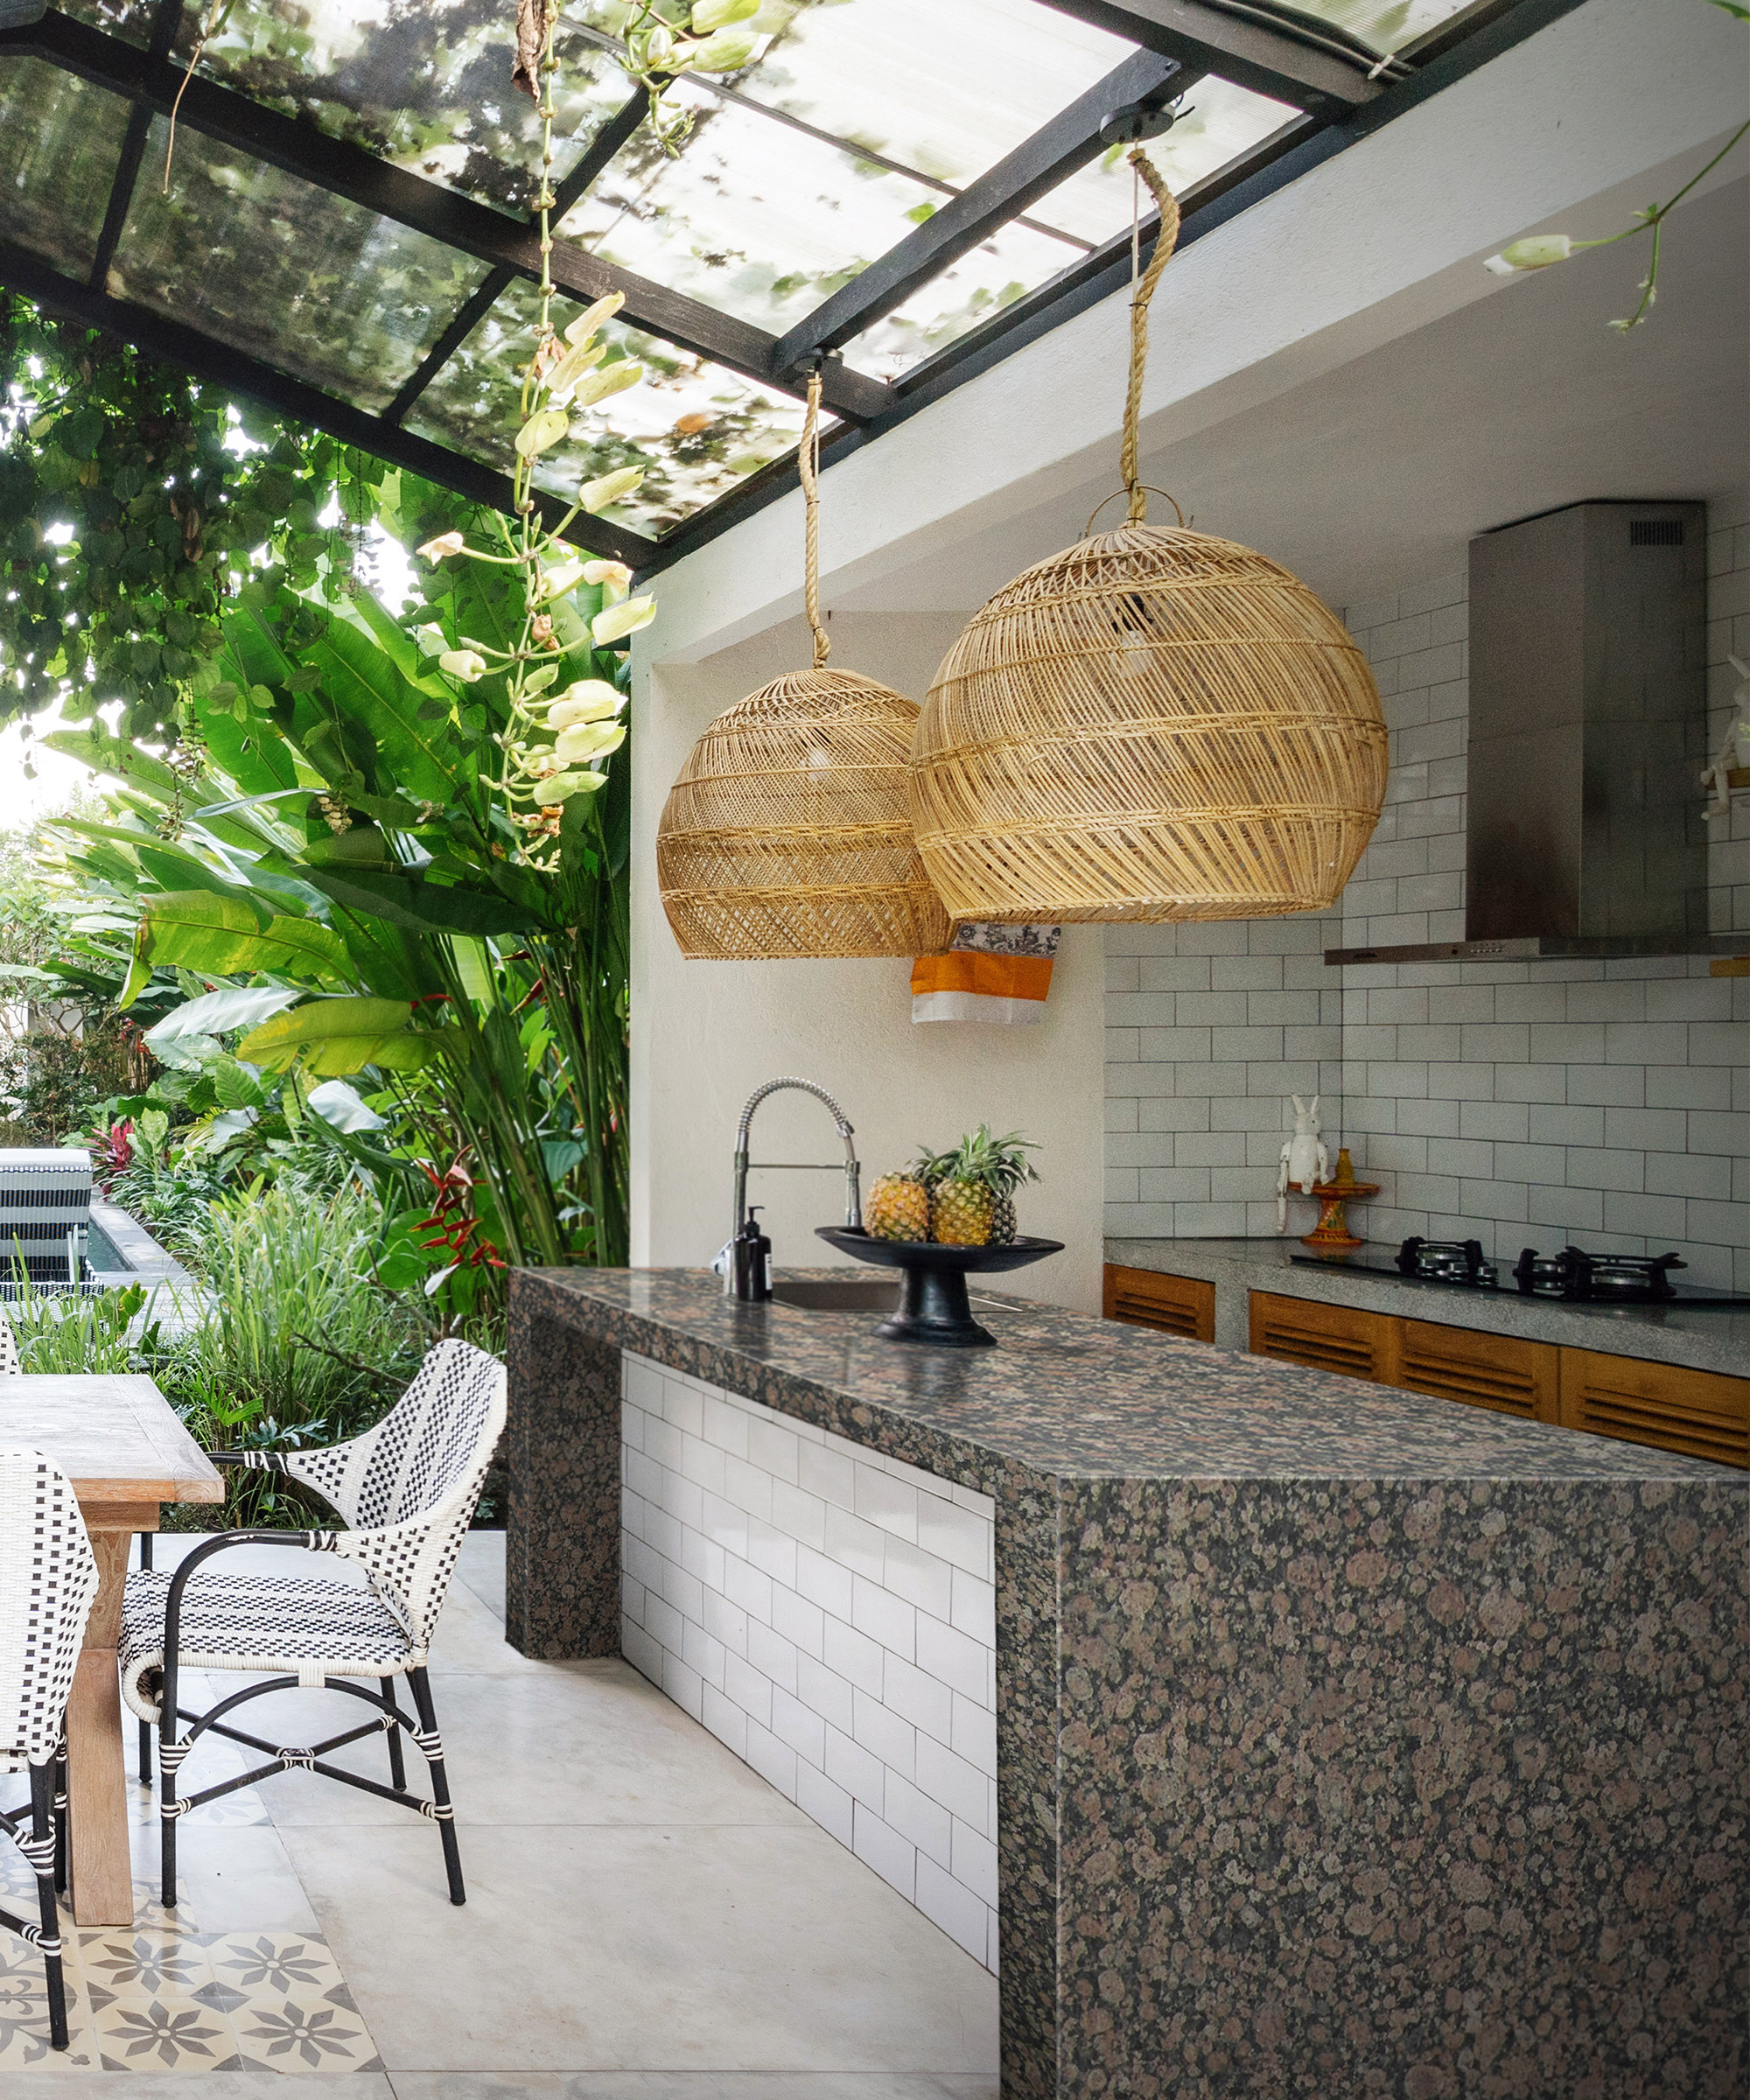 An outdoor kitchen under a permanent glass structure with a huge granite work top